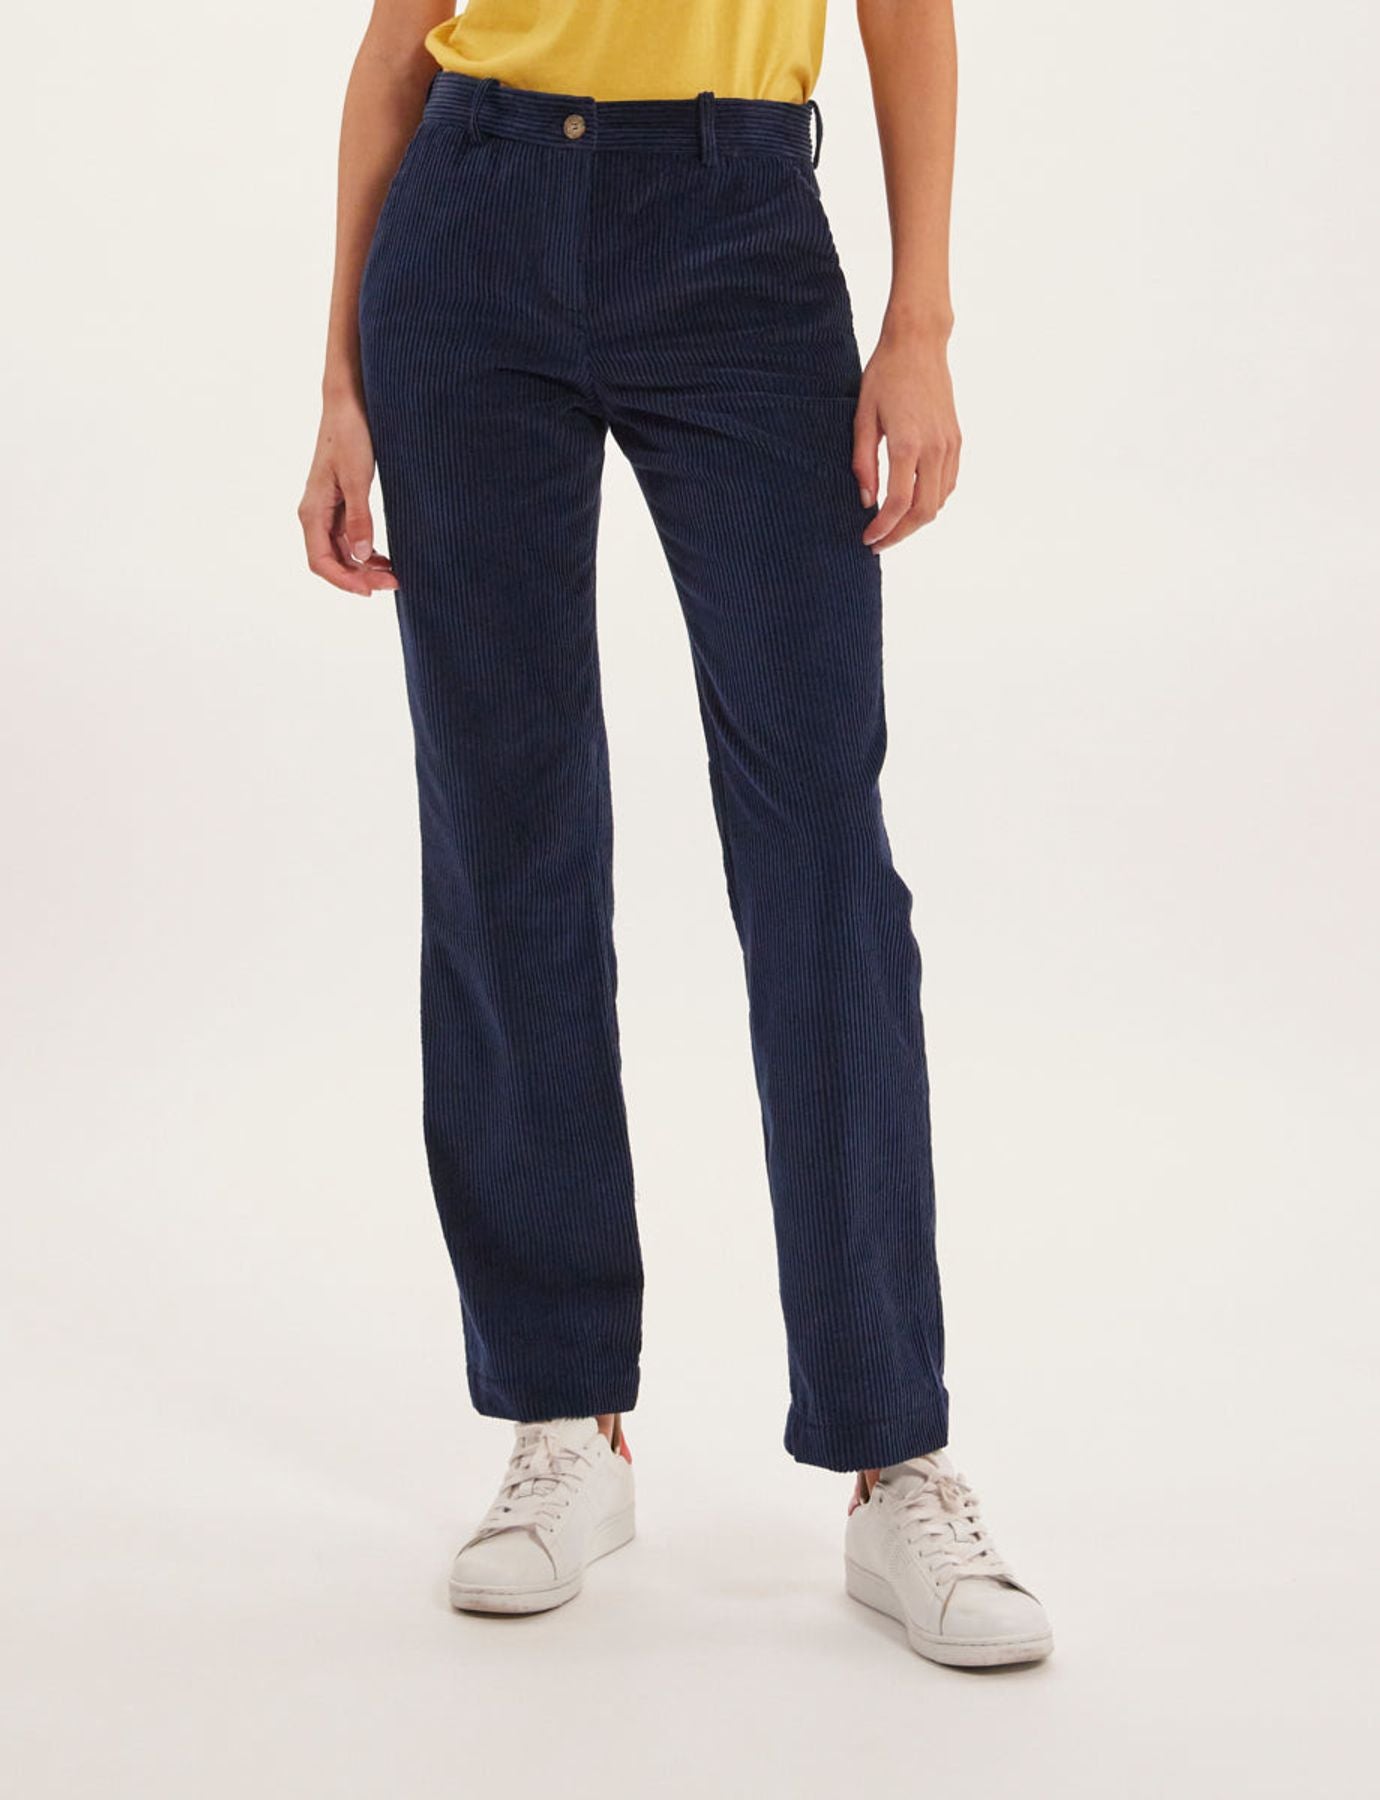 trousers-francisco-blue-navy-cotton